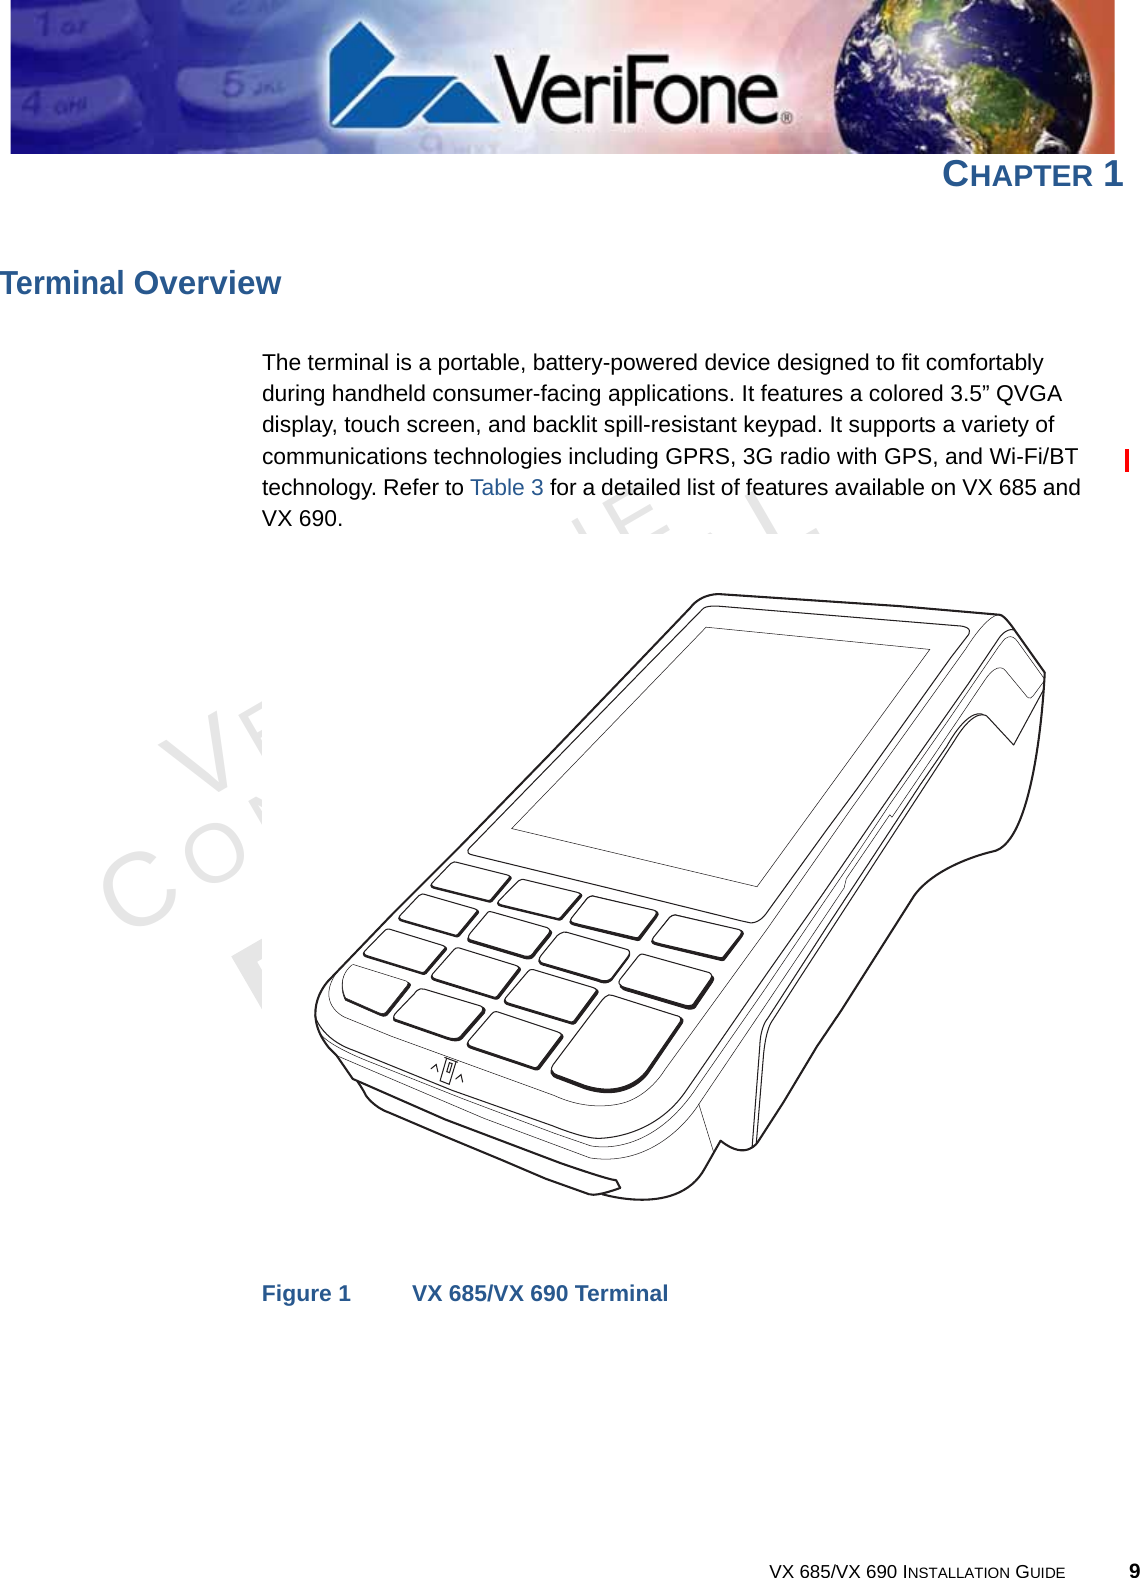 VERIFONECONFIDENTIALREVISION B.1 VX 685/VX 690 INSTALLATION GUIDE 9CHAPTER 1Terminal OverviewThe terminal is a portable, battery-powered device designed to fit comfortably during handheld consumer-facing applications. It features a colored 3.5” QVGA display, touch screen, and backlit spill-resistant keypad. It supports a variety of communications technologies including GPRS, 3G radio with GPS, and Wi-Fi/BT technology. Refer to Table 3 for a detailed list of features available on VX 685 and VX 690.Figure 1 VX 685/VX 690 Terminal